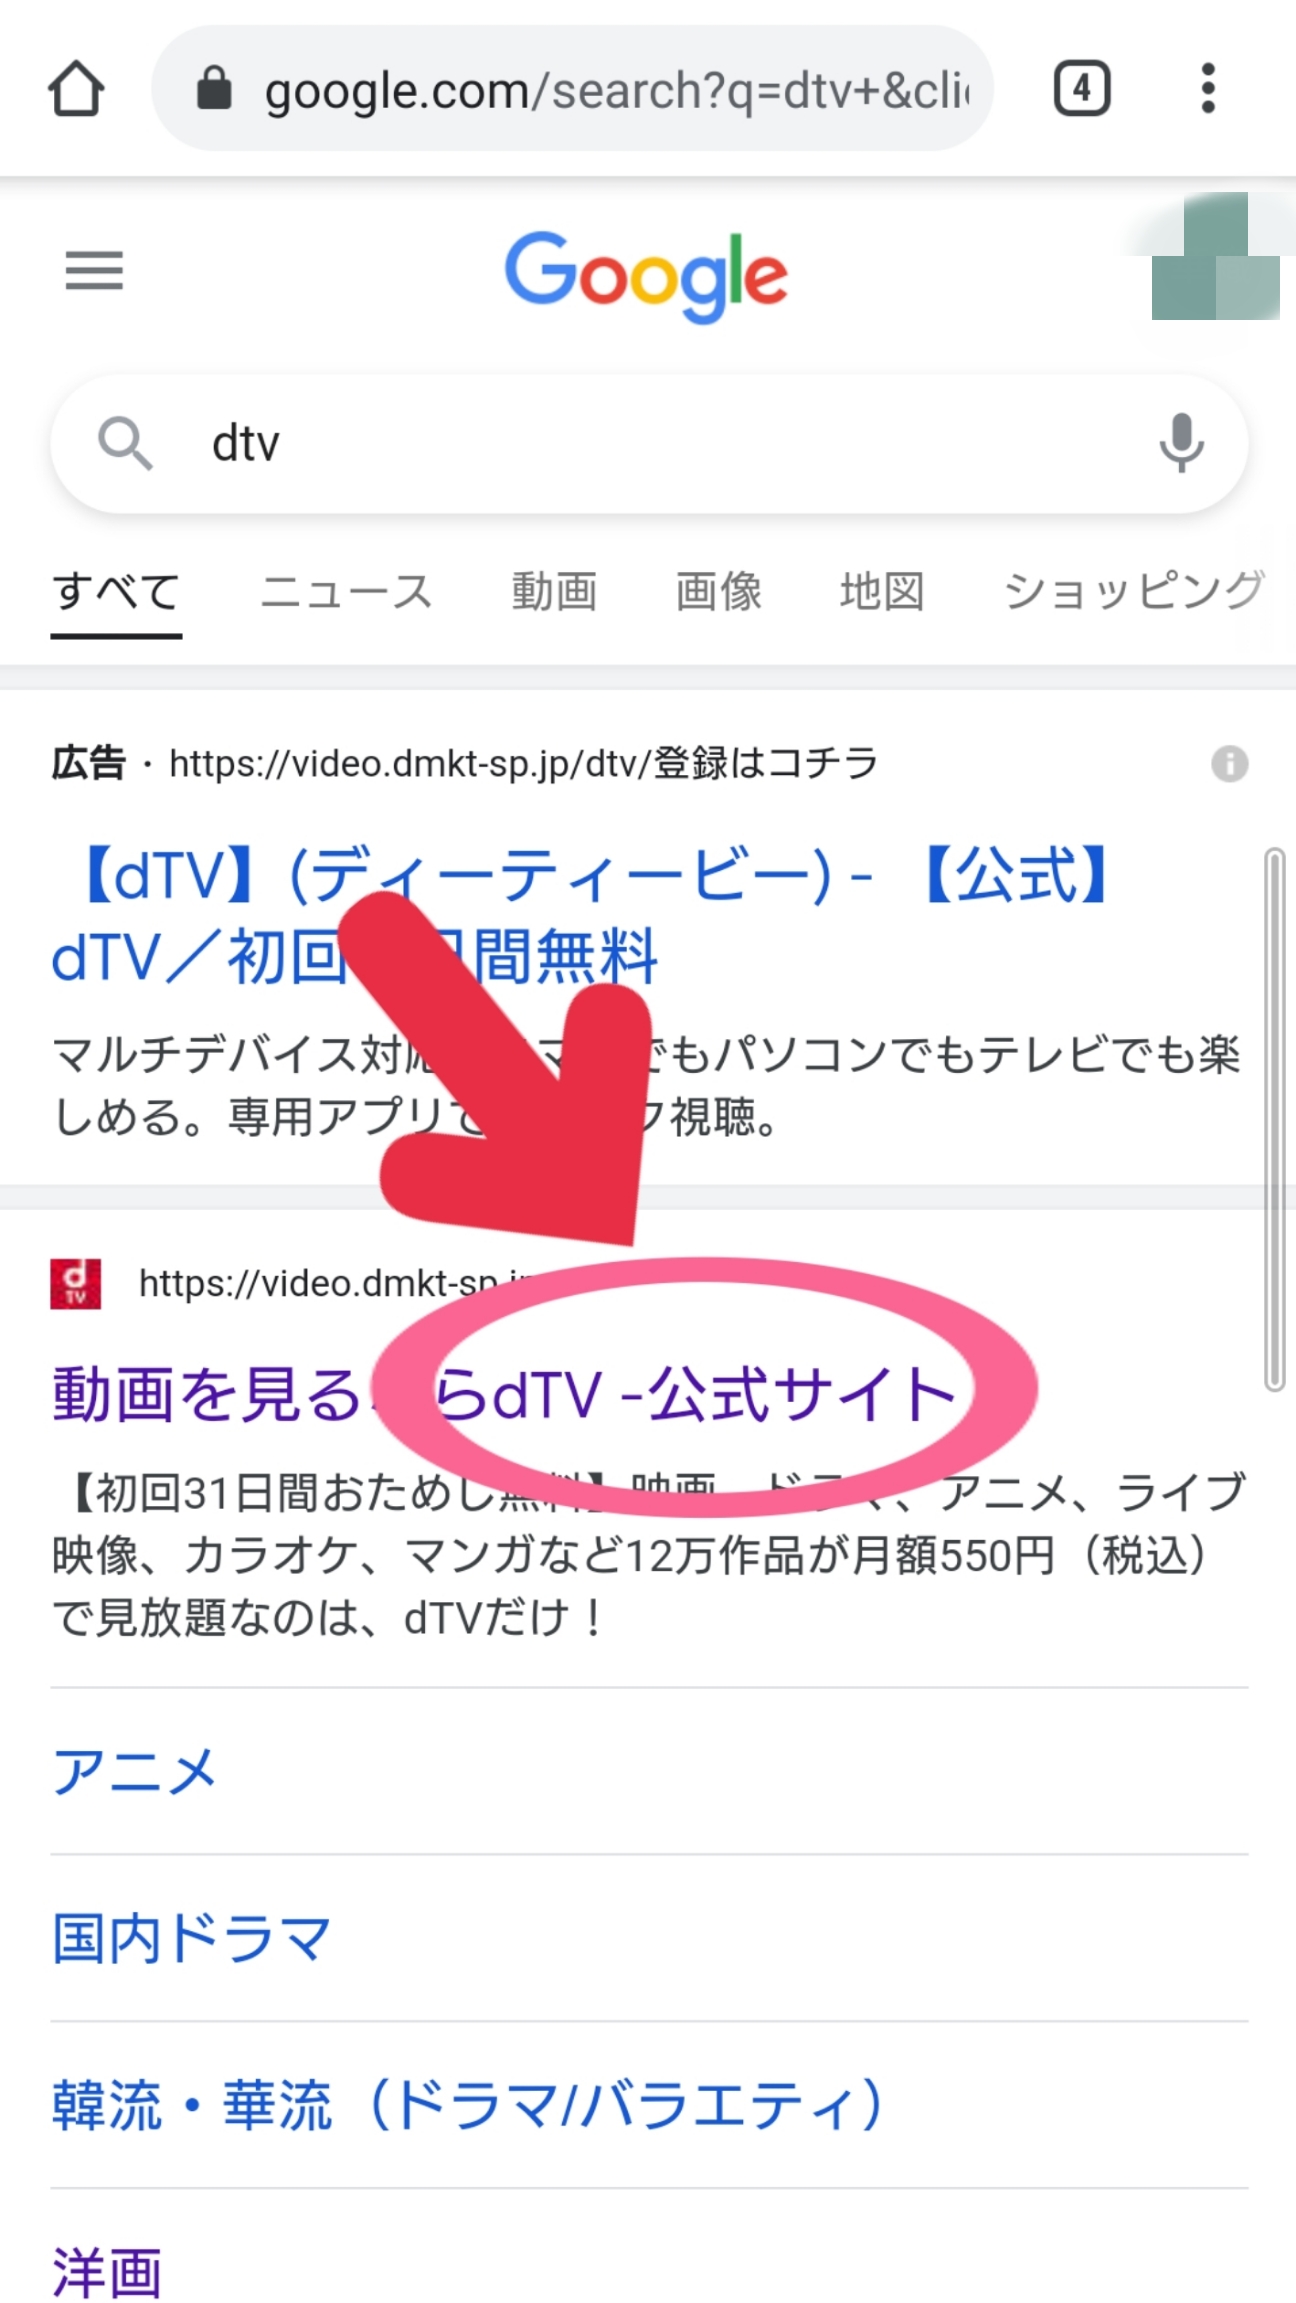 dTV　ブラウザ　公式　リンク　開く